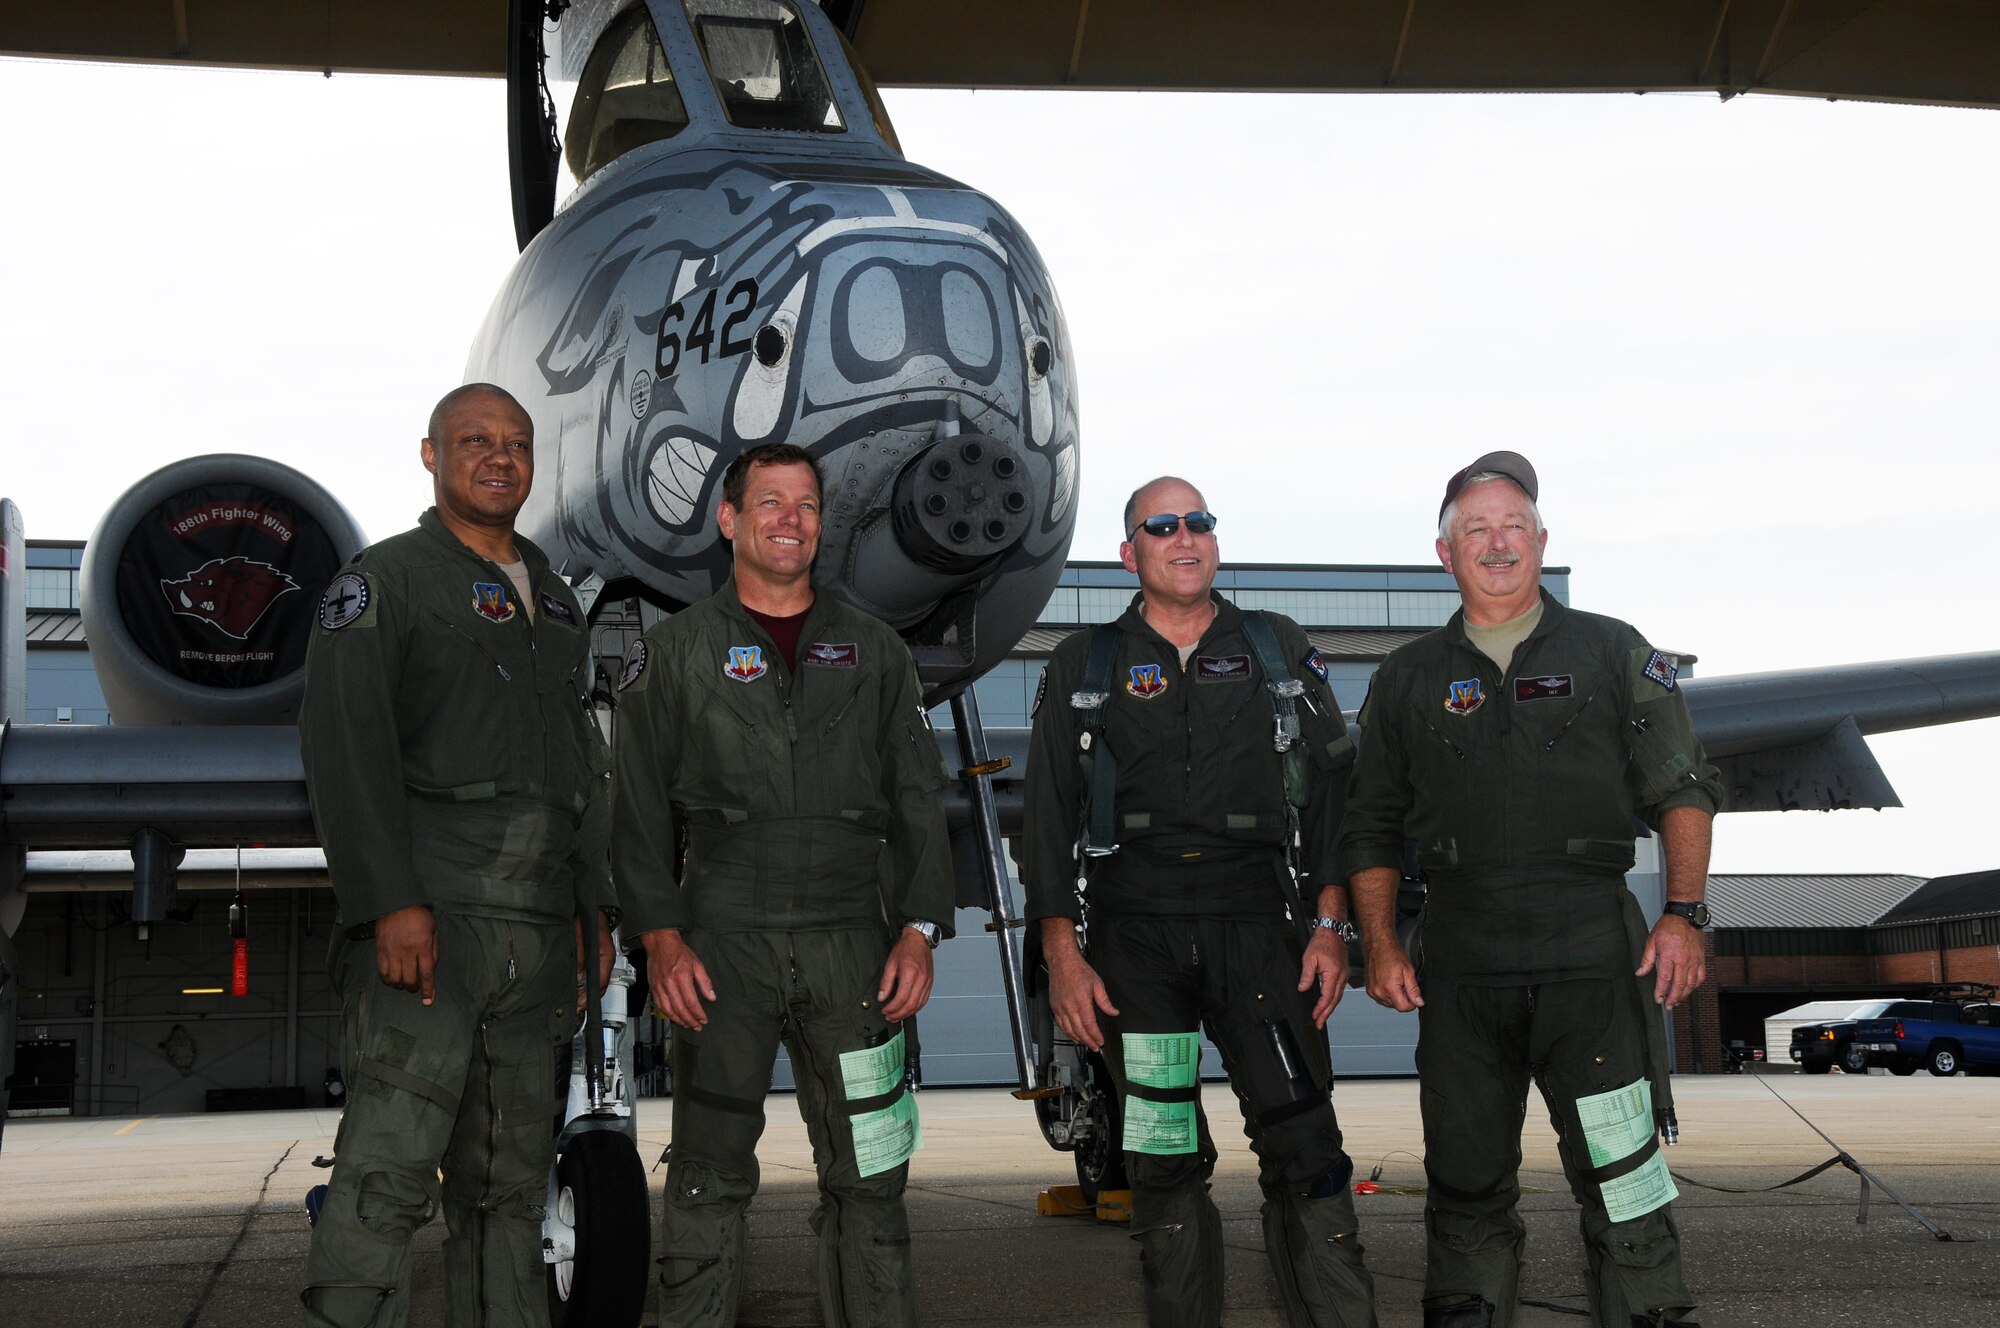 From left: Lt. Col. Tim Eddins, Lt. Col. Rod Vongrote, Lt. Col. Parker Pennings and Lt. Col. Mark Isenhower pose for a photo following their fini flights June 12. The four 188th Fighter Wing A-10C Thunderbolt II pilots recently retired from the Arkans...as Air National Guard. Collectively, the foursome accumulated 107 years of experience and logged more than 12,500 flight hours. Isenhower retired Sept. 30 after flying the F-4 Phantom, F-16 Falcon, A-10, T-38 and T-37 during his 29-year career. Eddins retired Aug. 9 after flying the F-16, A-10, T-38 and T-37 during his 32-year career. Pennings retired Aug. 12 and flew the F-16, A-10 and T-38 during his 24-year career. Vongrote’s 22-year career was spent flying the F-16, A-10 and T-38. (National Guard photo by Senior Airman Hannah Landeros/188th Fighter Wing Public Affairs)